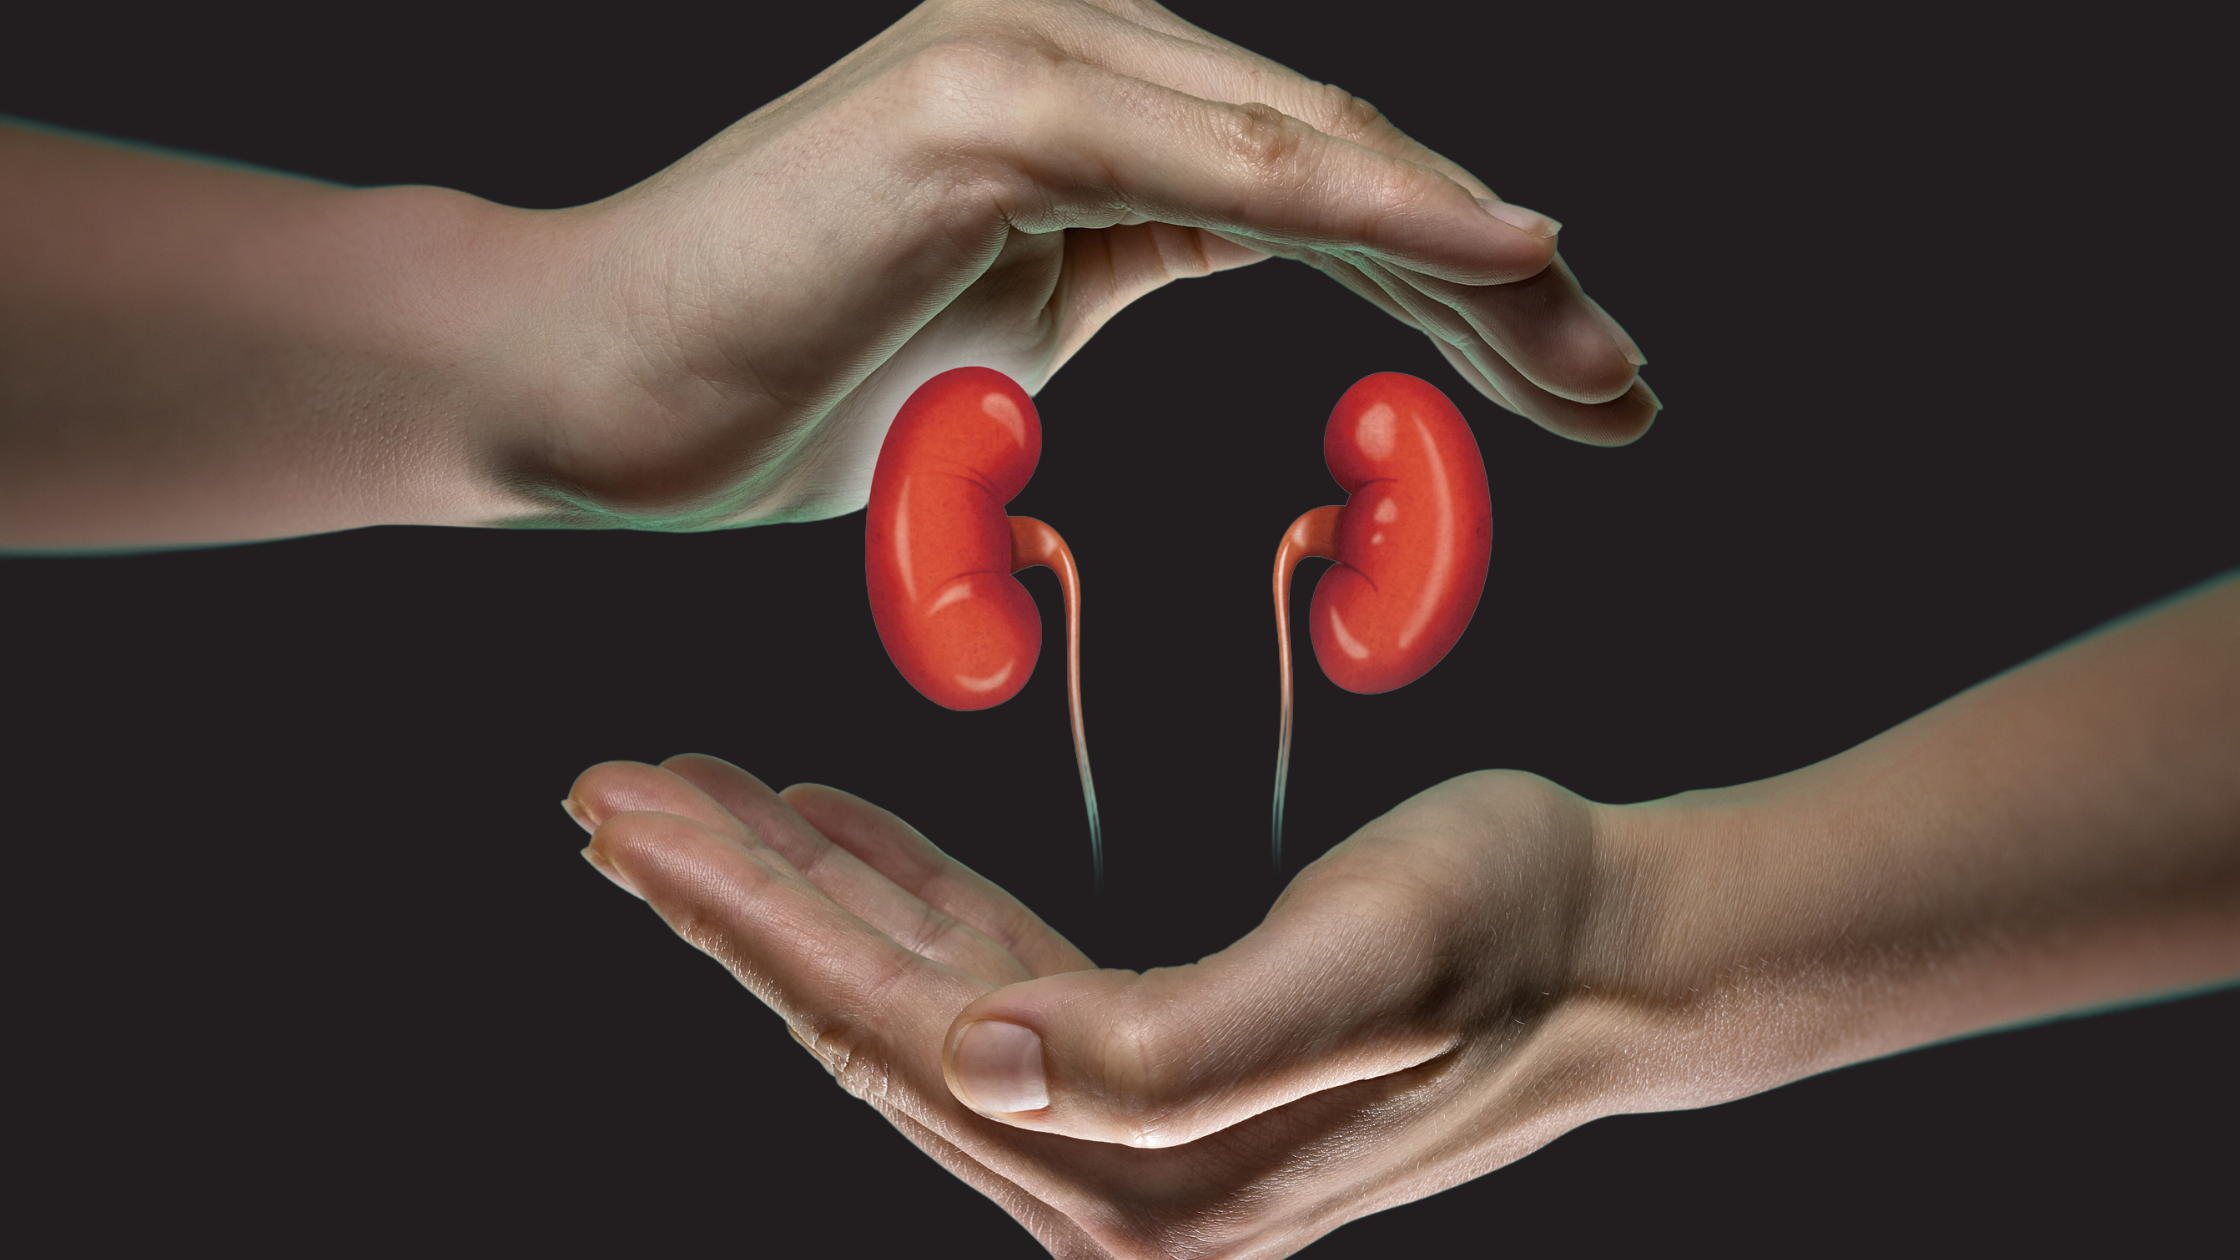 high cholesterol can cause kidney disease